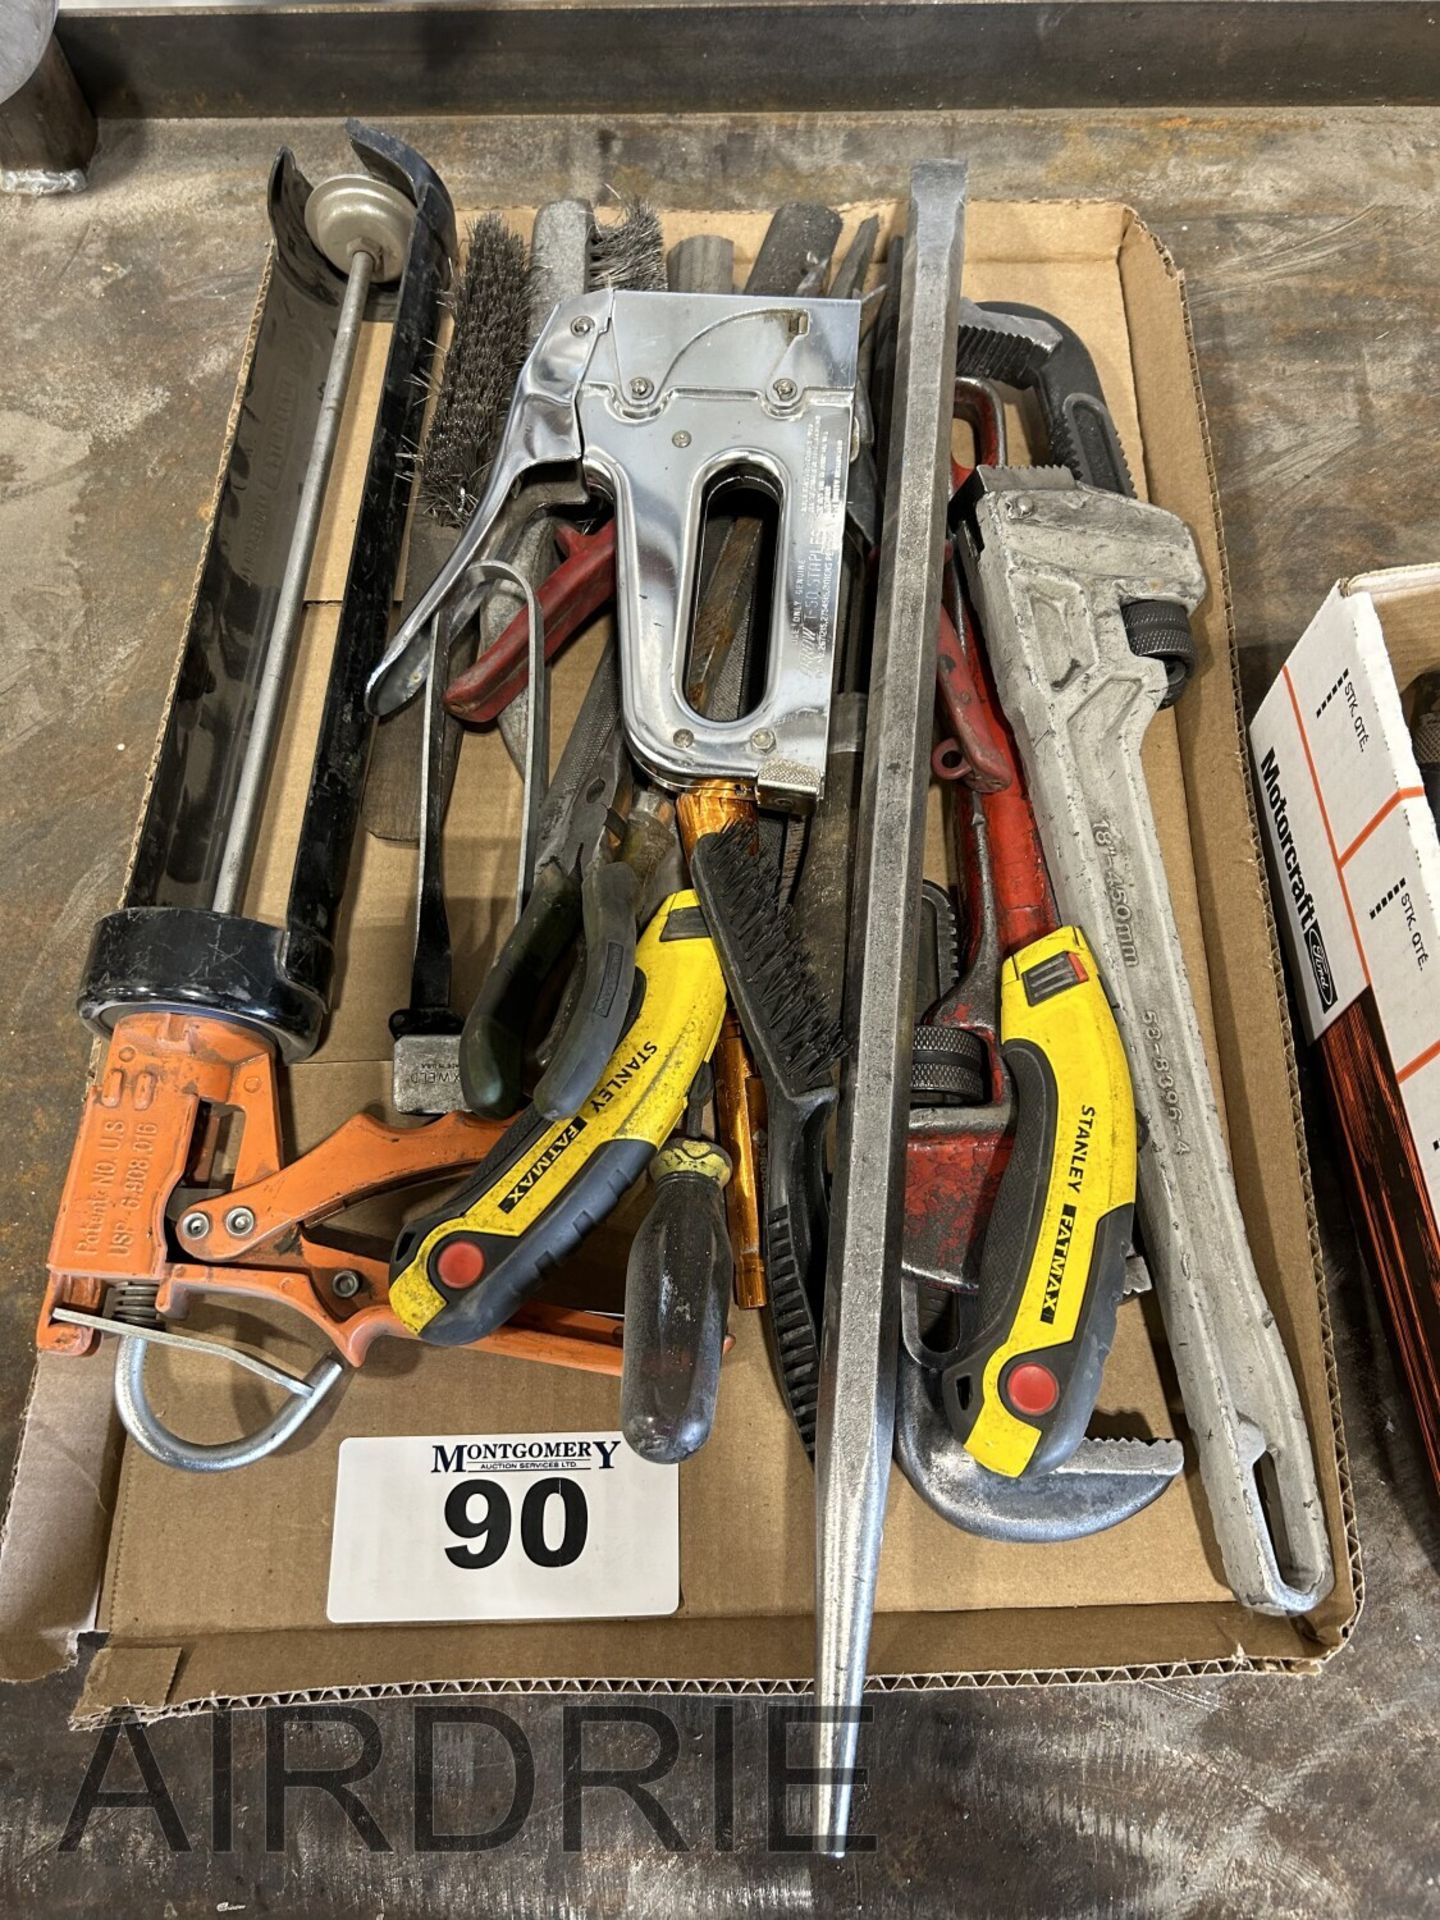 *OFFSITE* L/O ASSORTED HAND TOOLS, ALUMINUM 18" PIPE WRENCH, STEEL 18" PIPE WRENCH, PRY-BAR, ETC.